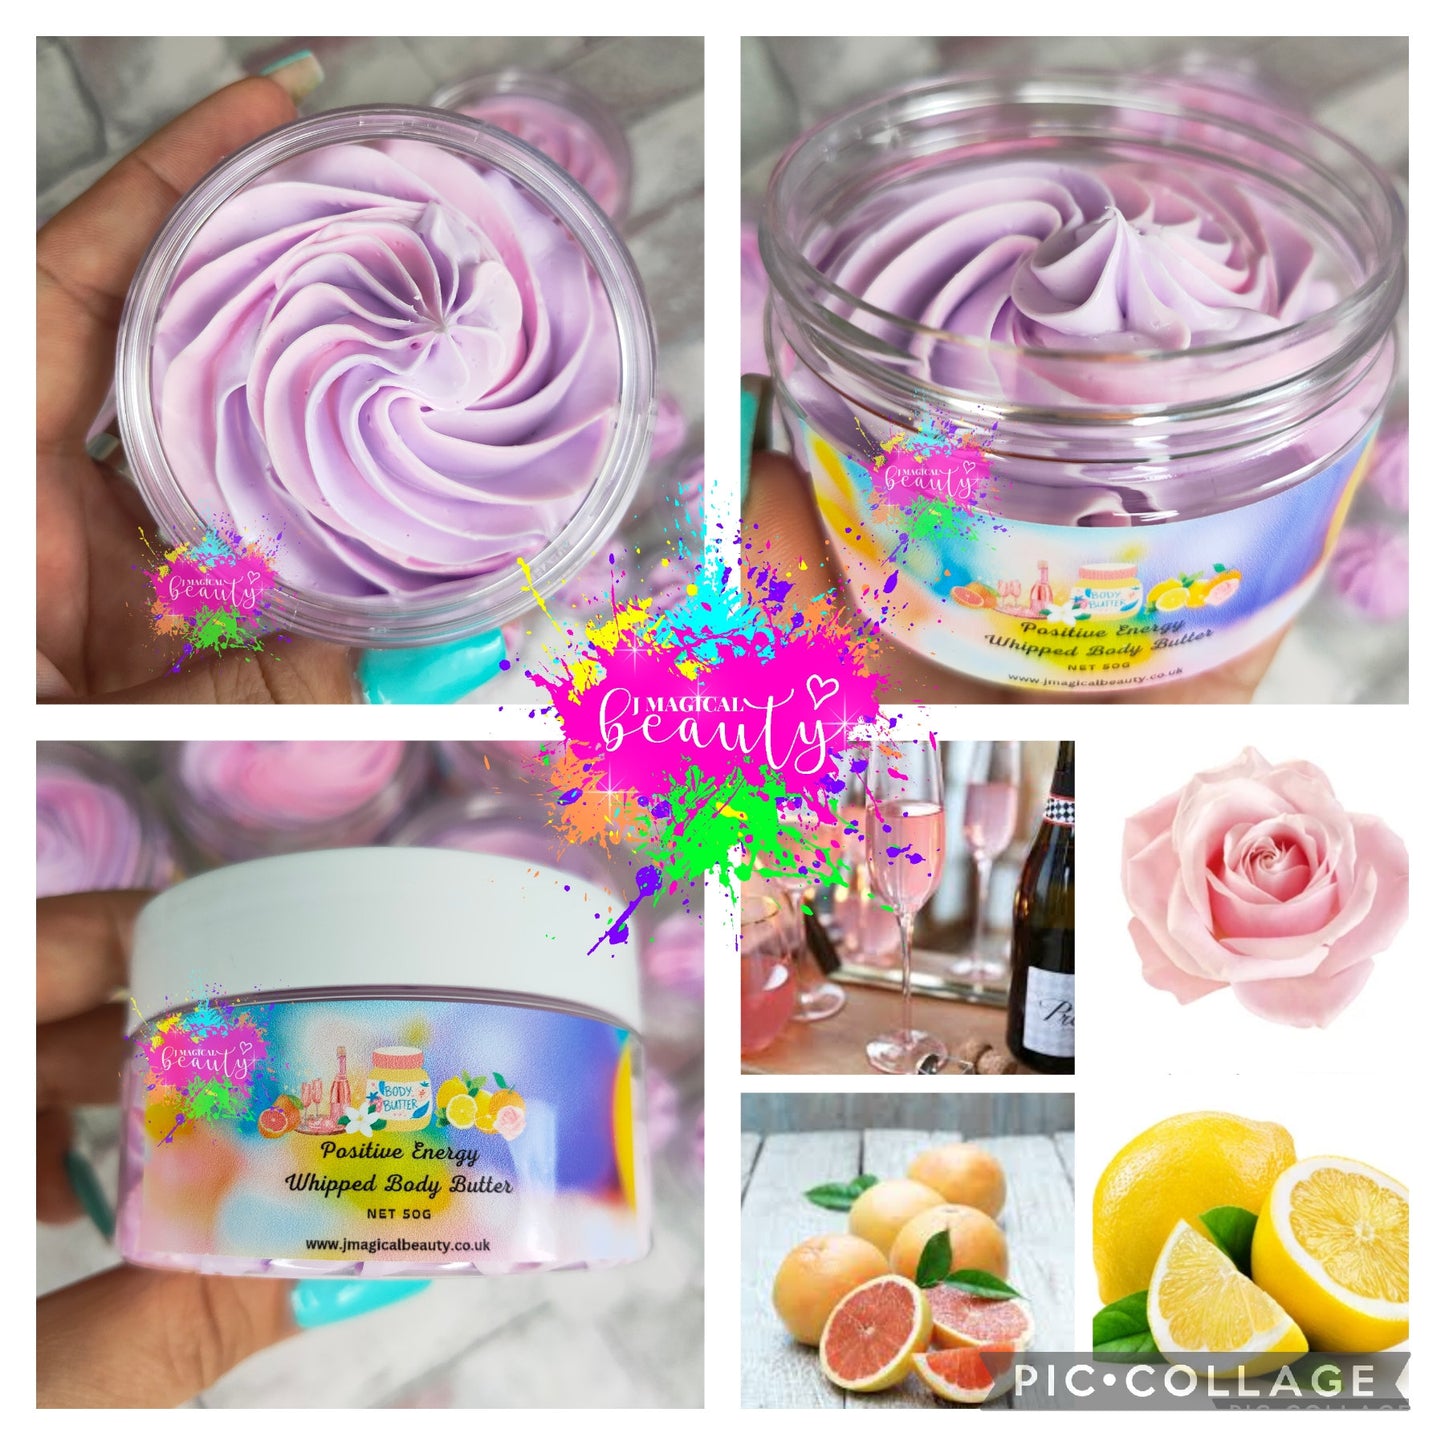 Whipped Body Butter Positive energy scent